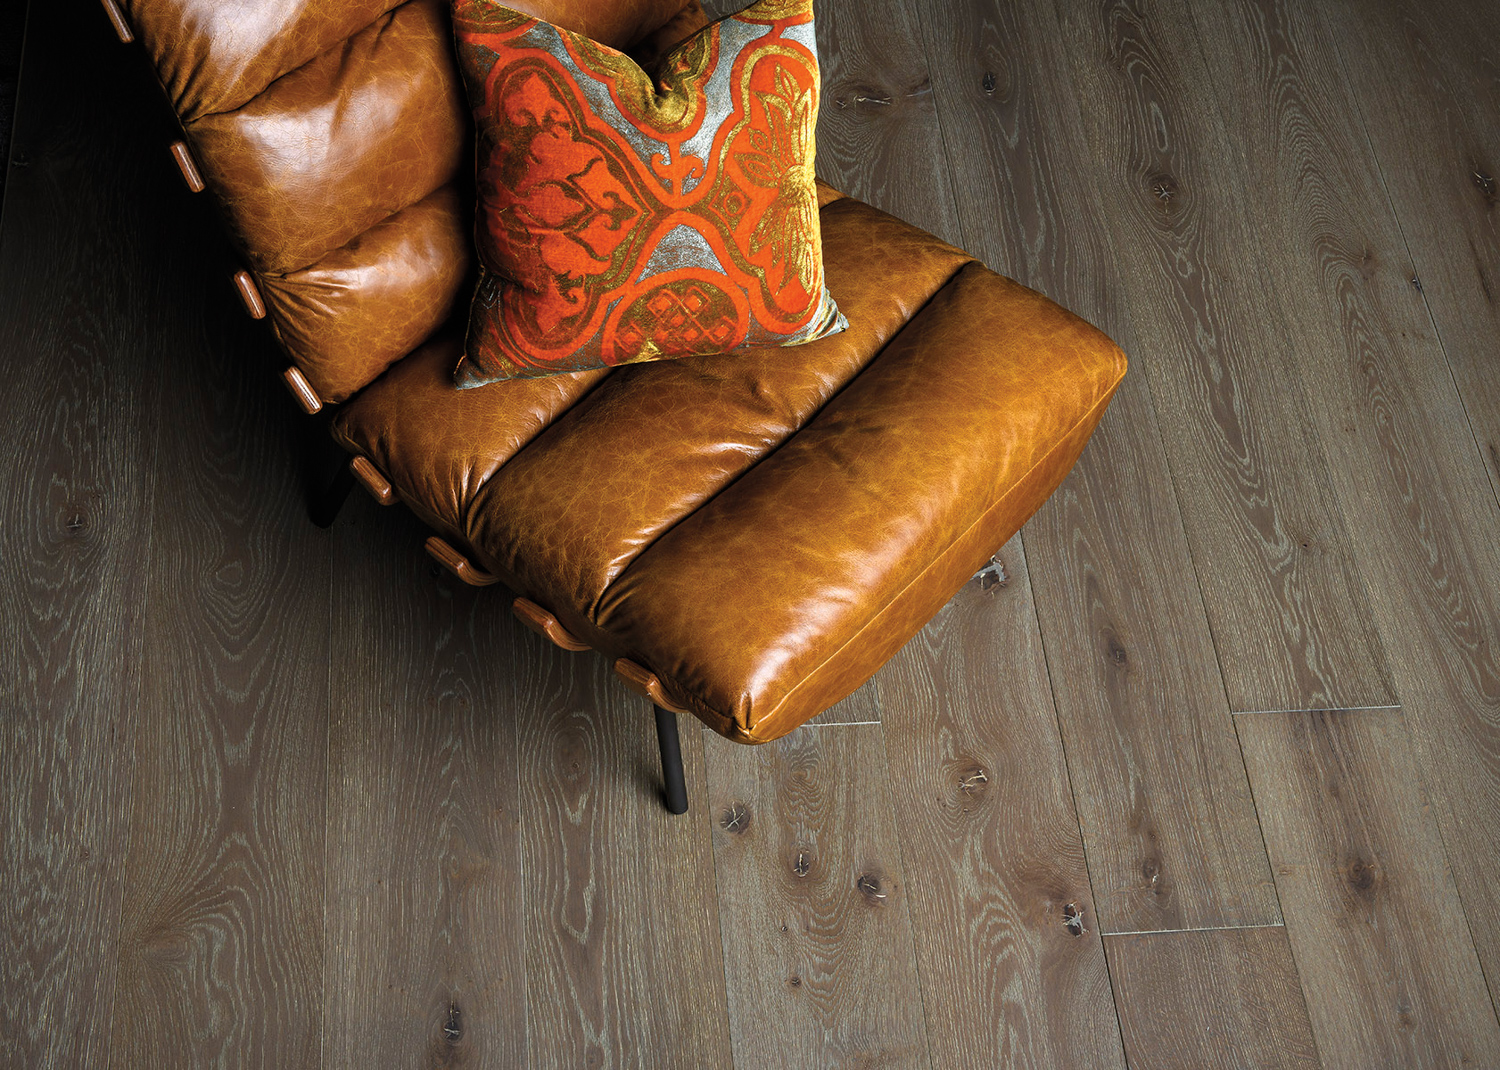 leather lounge chair with an orange-patterned pillow atop wooden floors